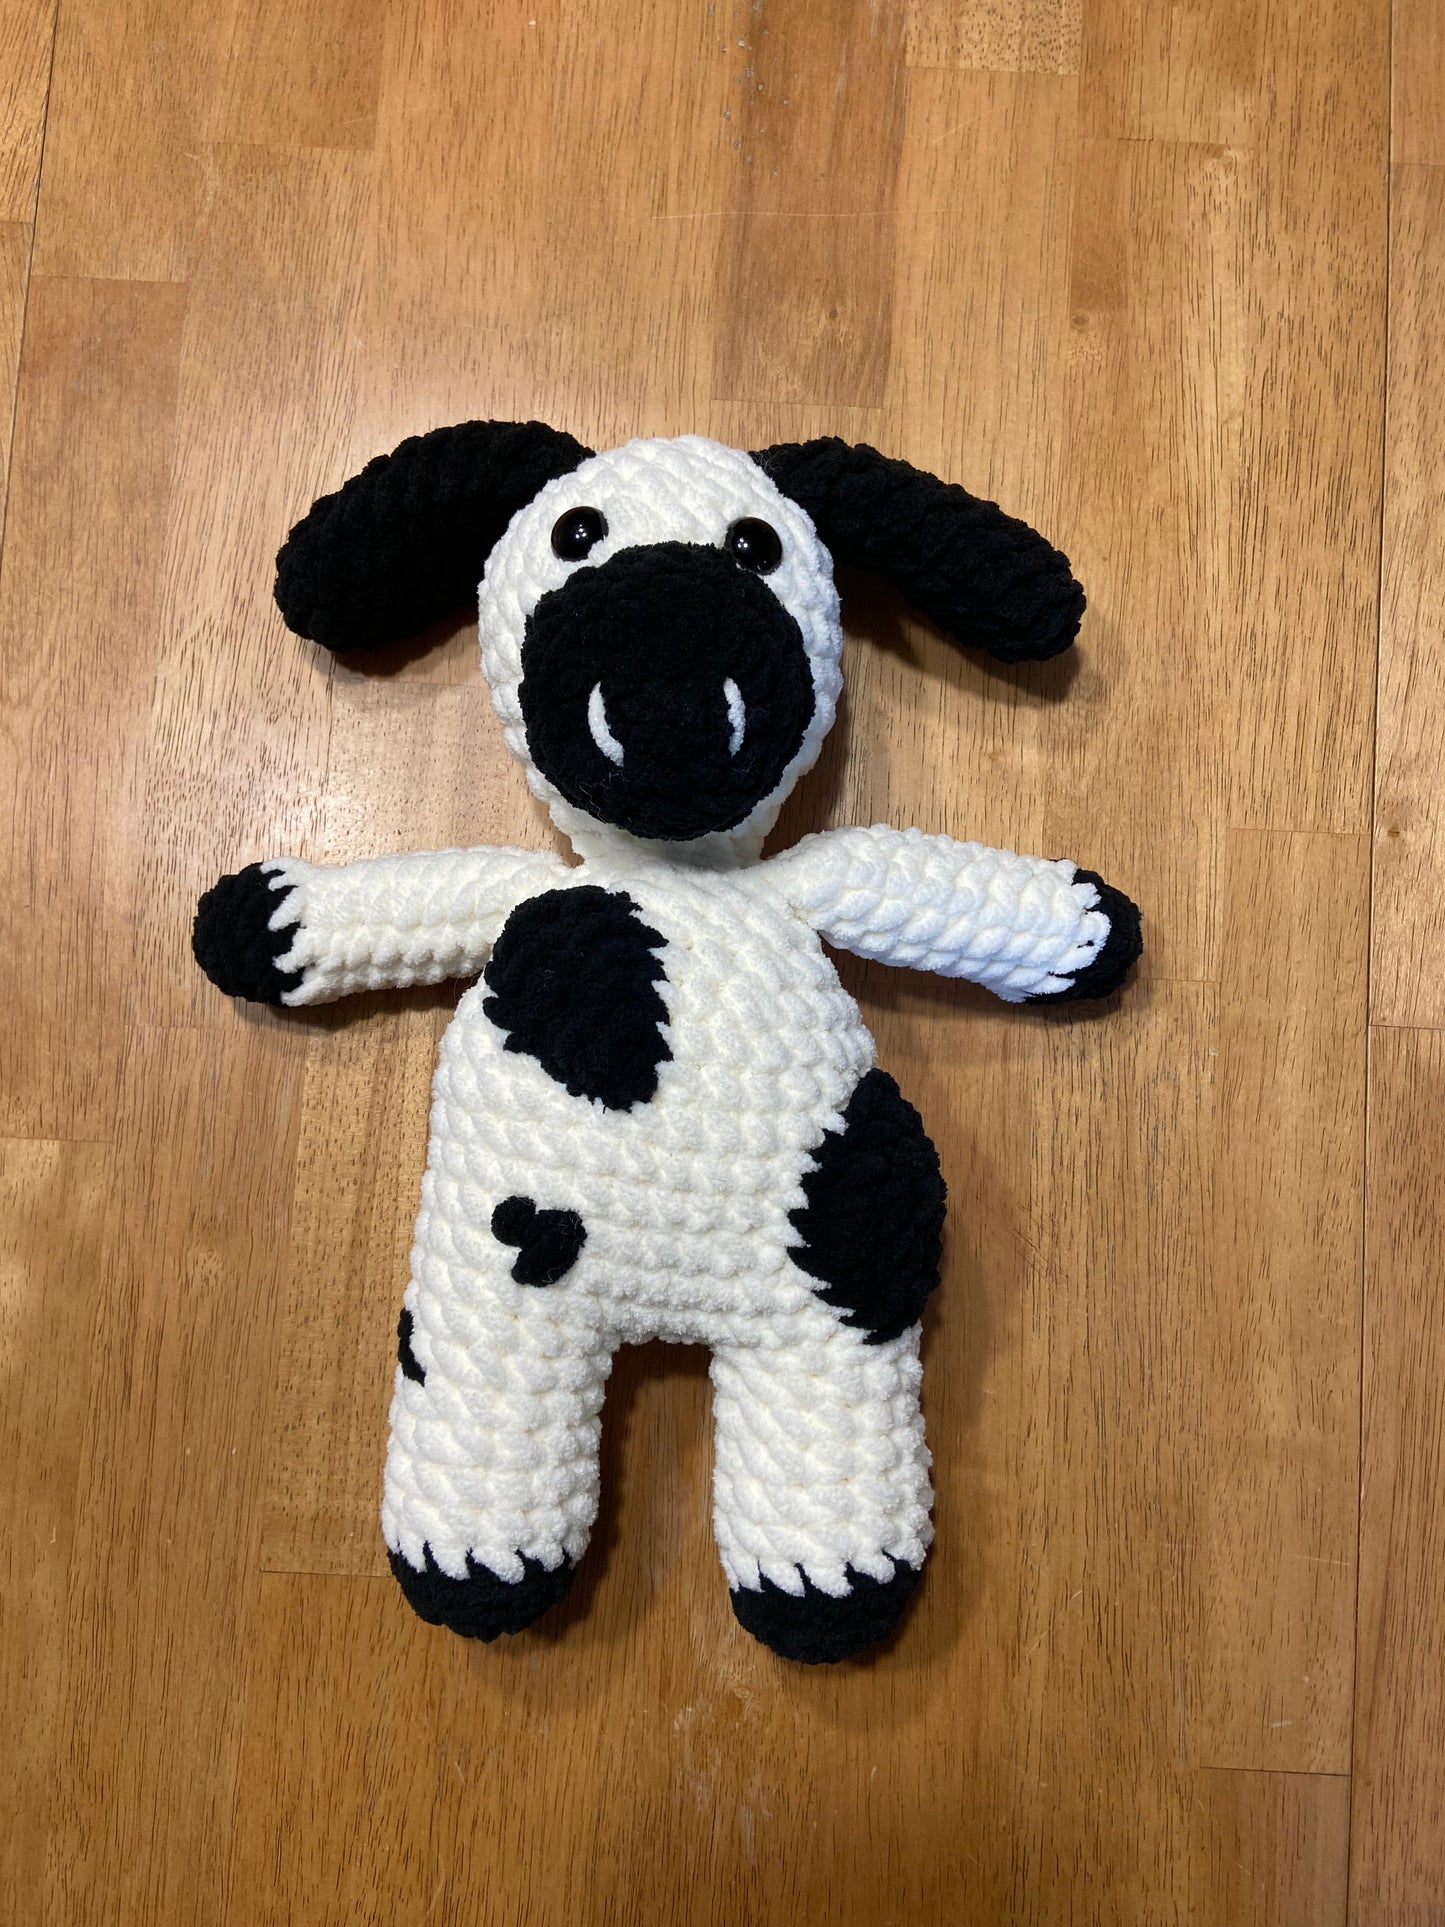 Handcrafted Crochet Cow: Adorable and Soft Plush Toy for Kids